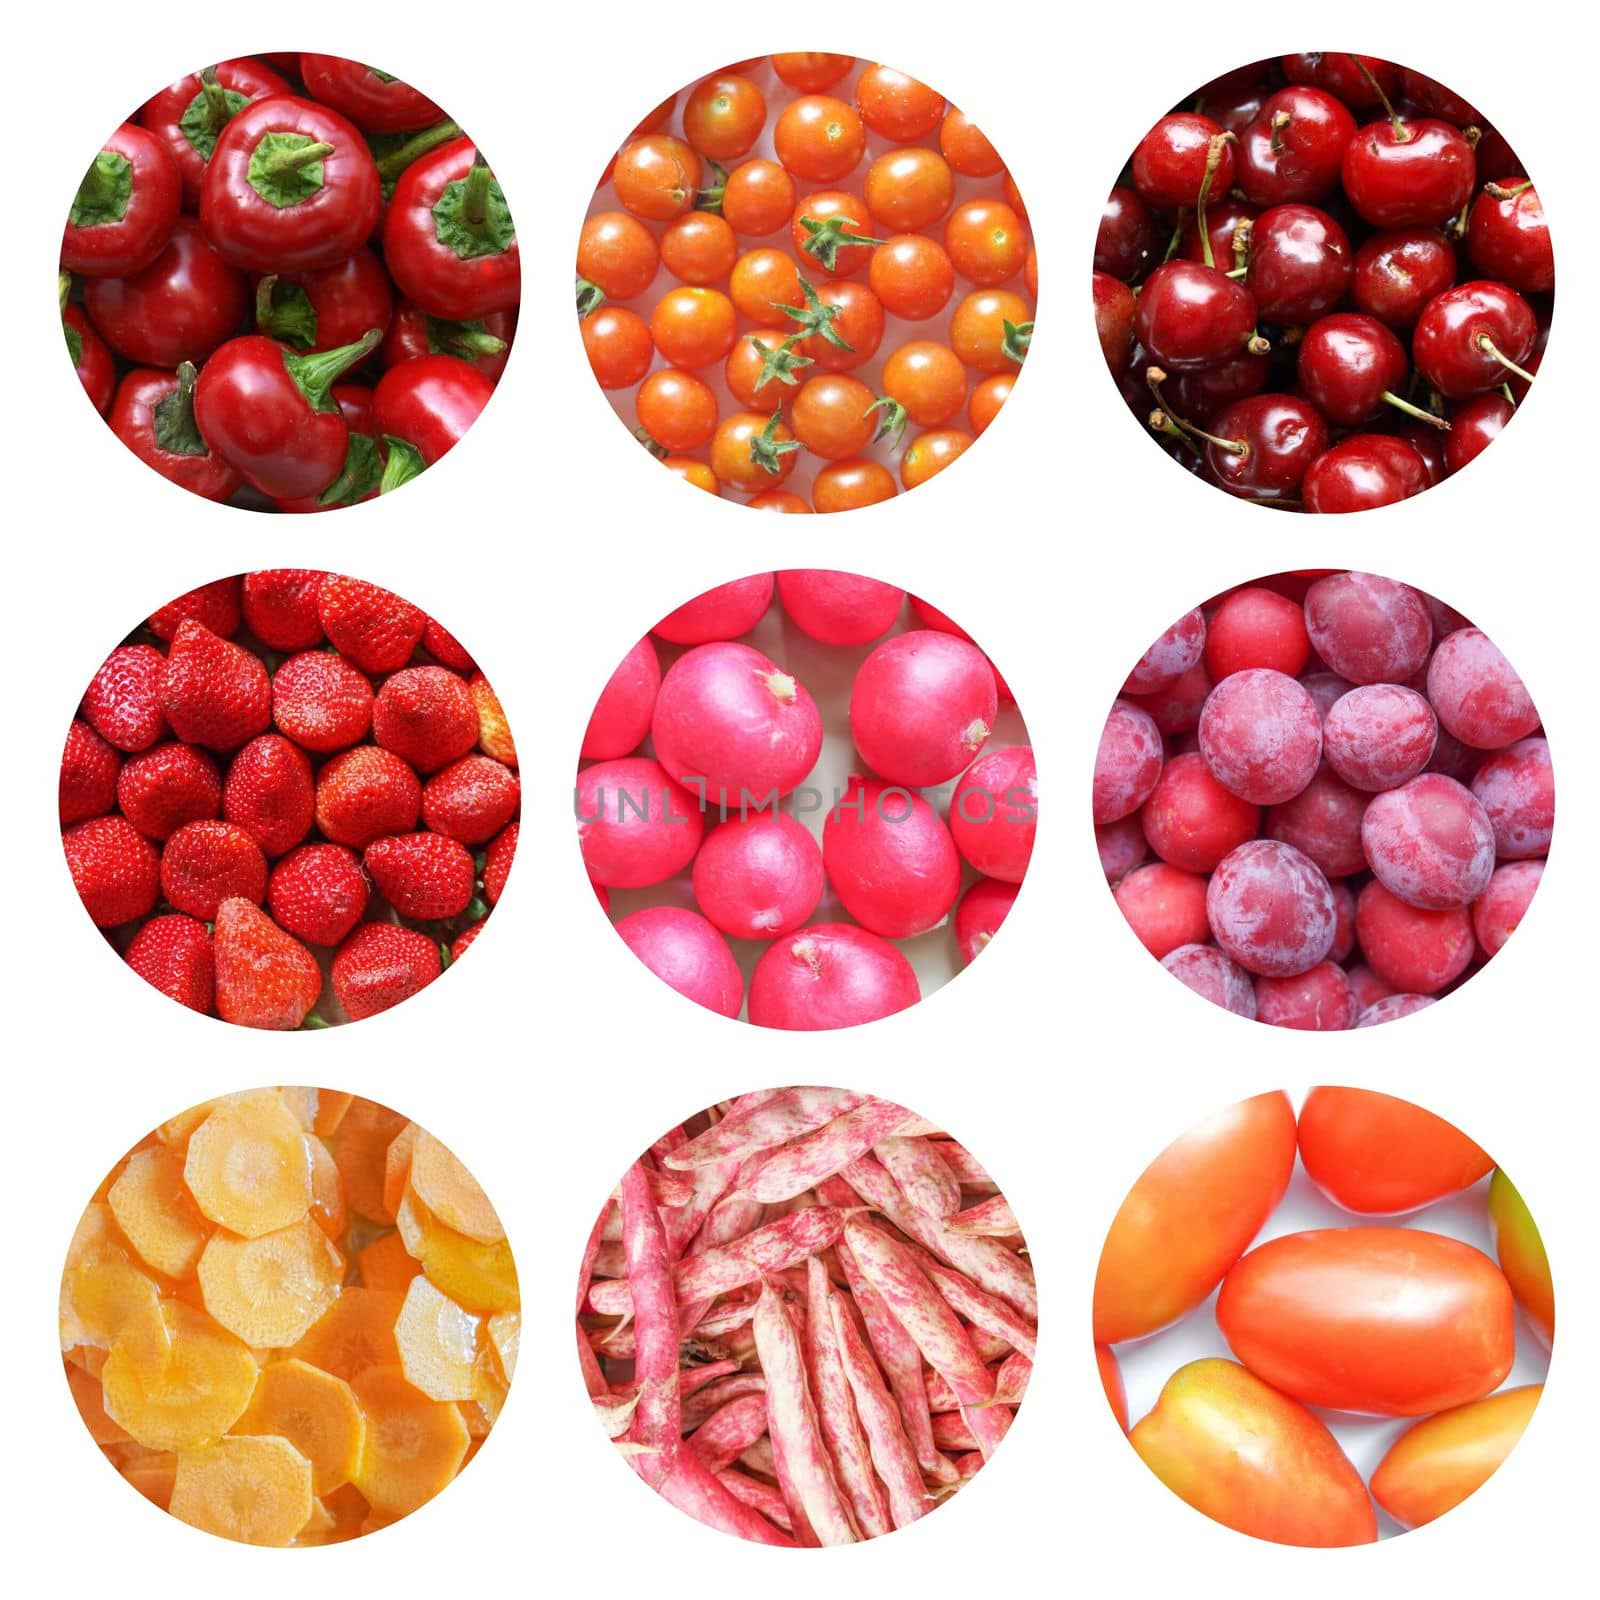 Vegetarian food collage: red fruits and vegetables including cherries, tomatoes, prunes, radish, beans, carrots